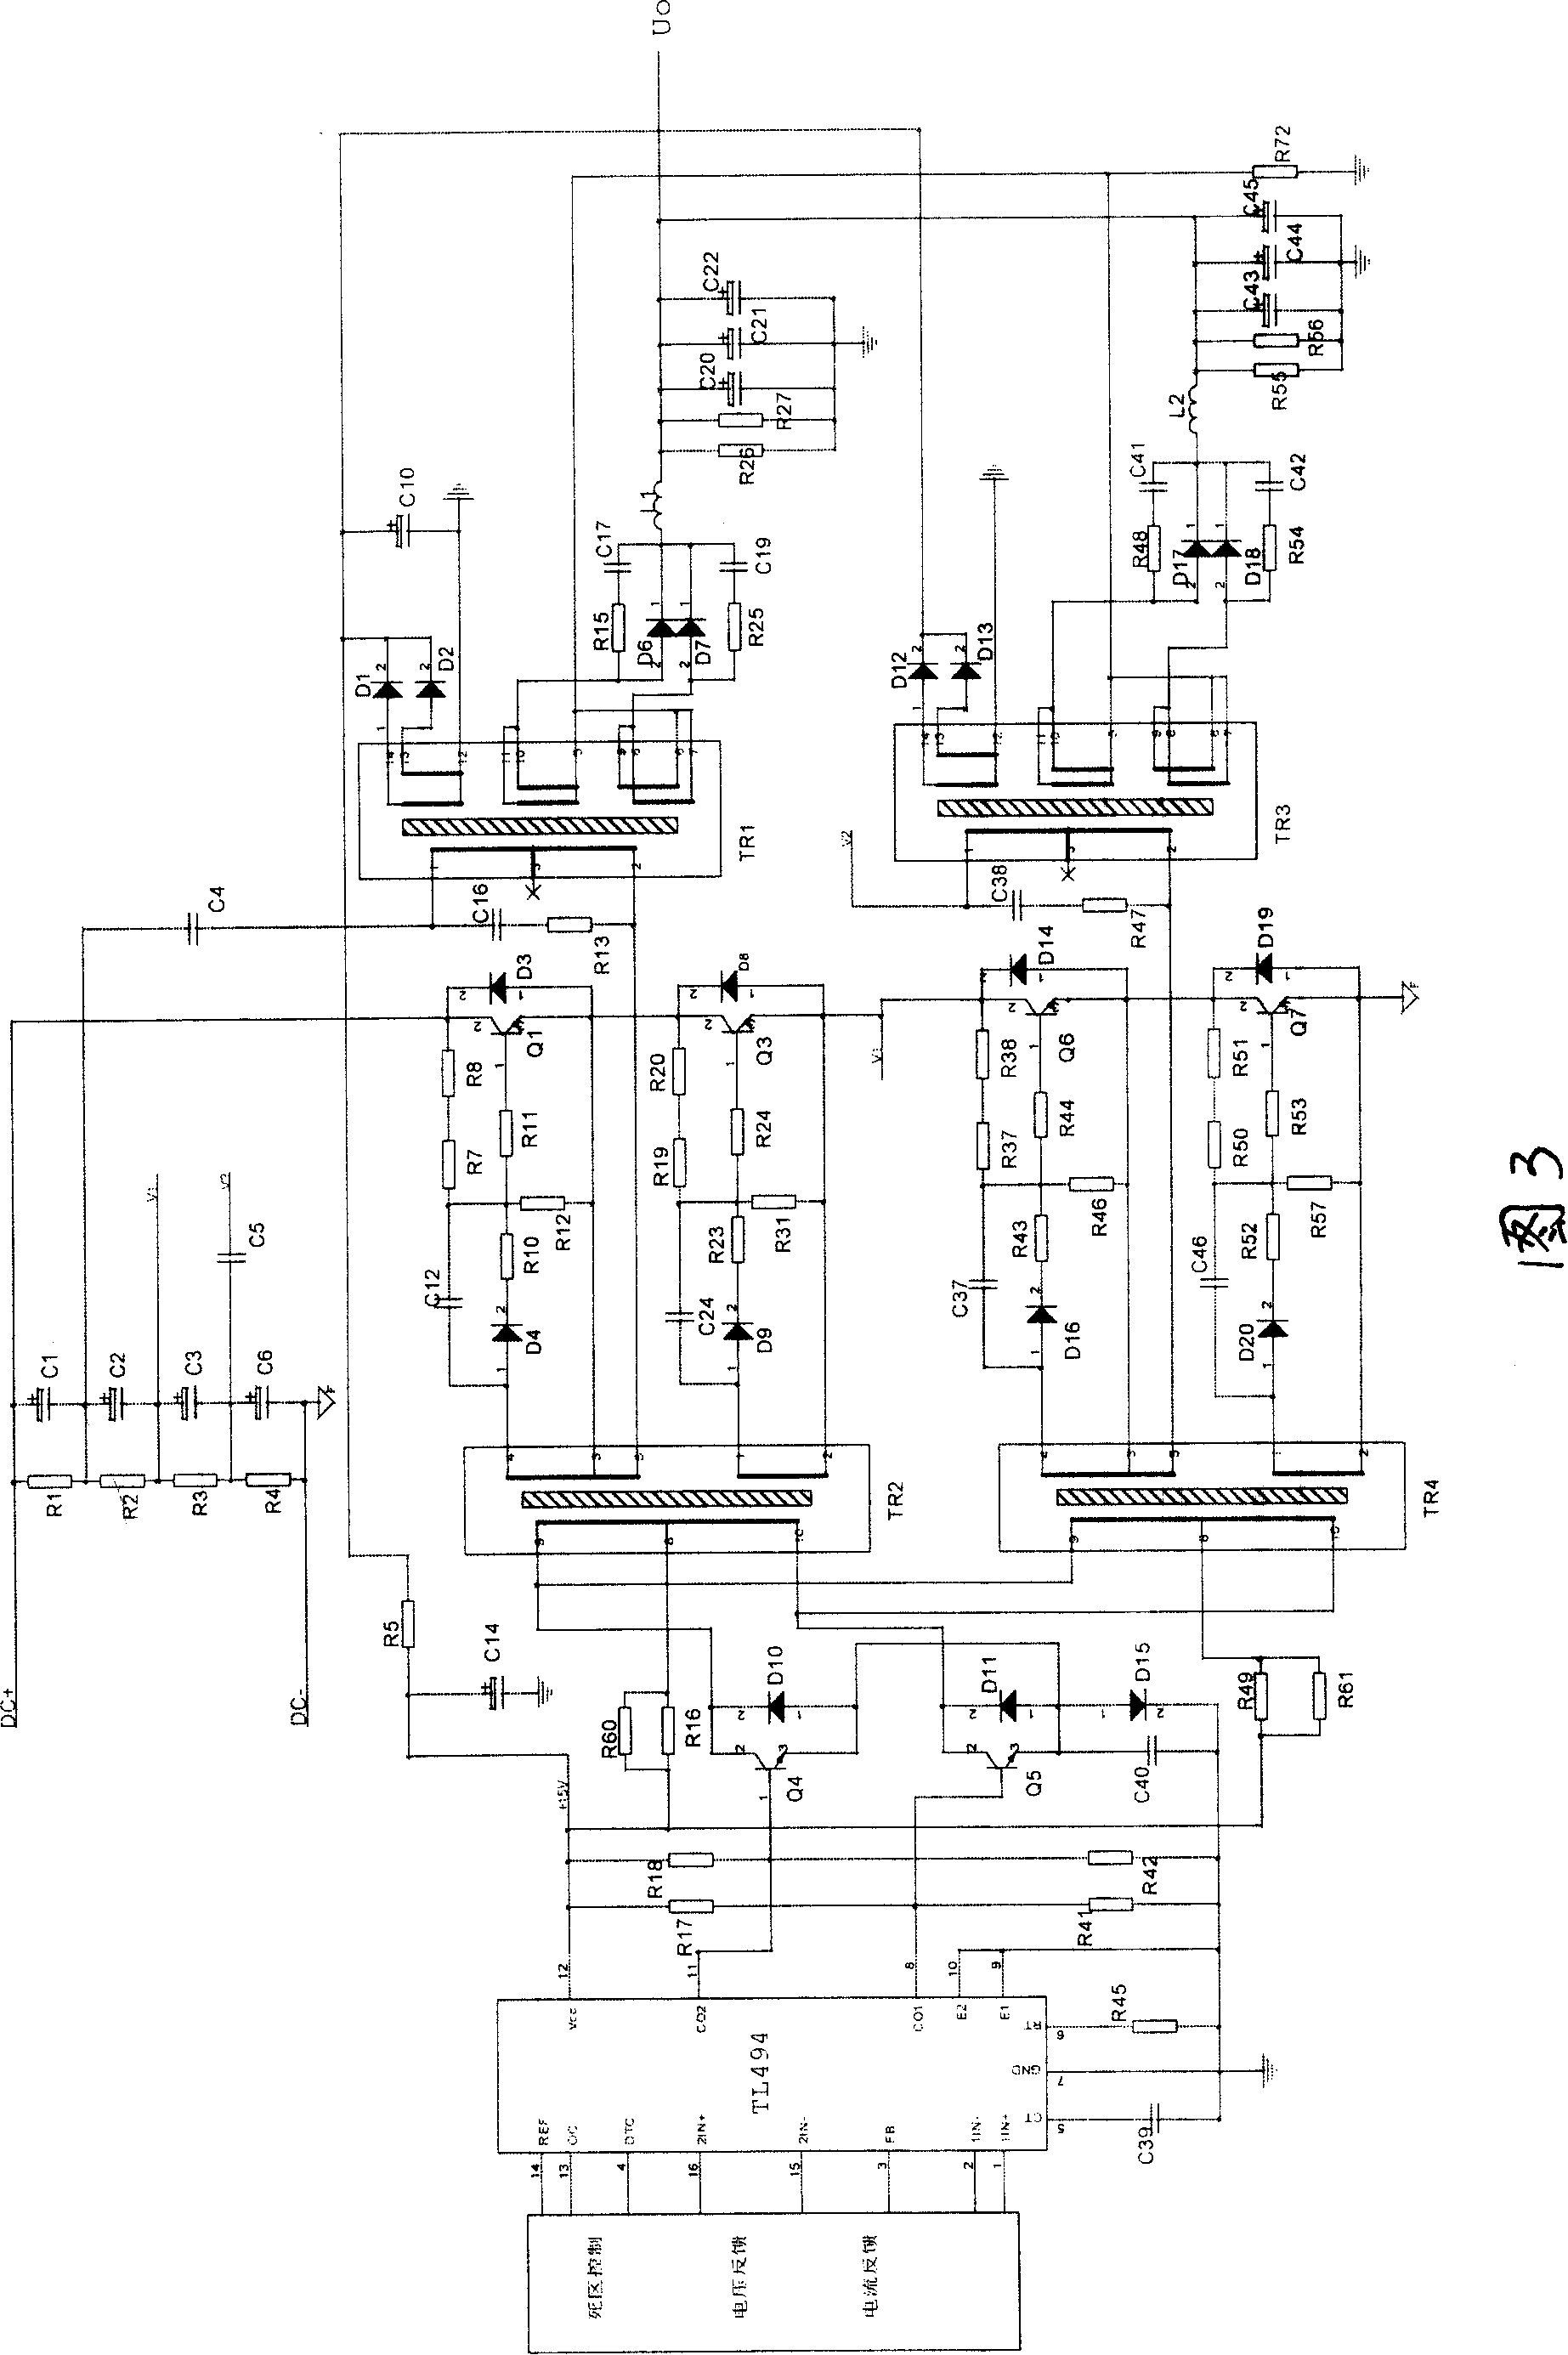 DC/DC transformation topology circuit of high-voltage switch power supply